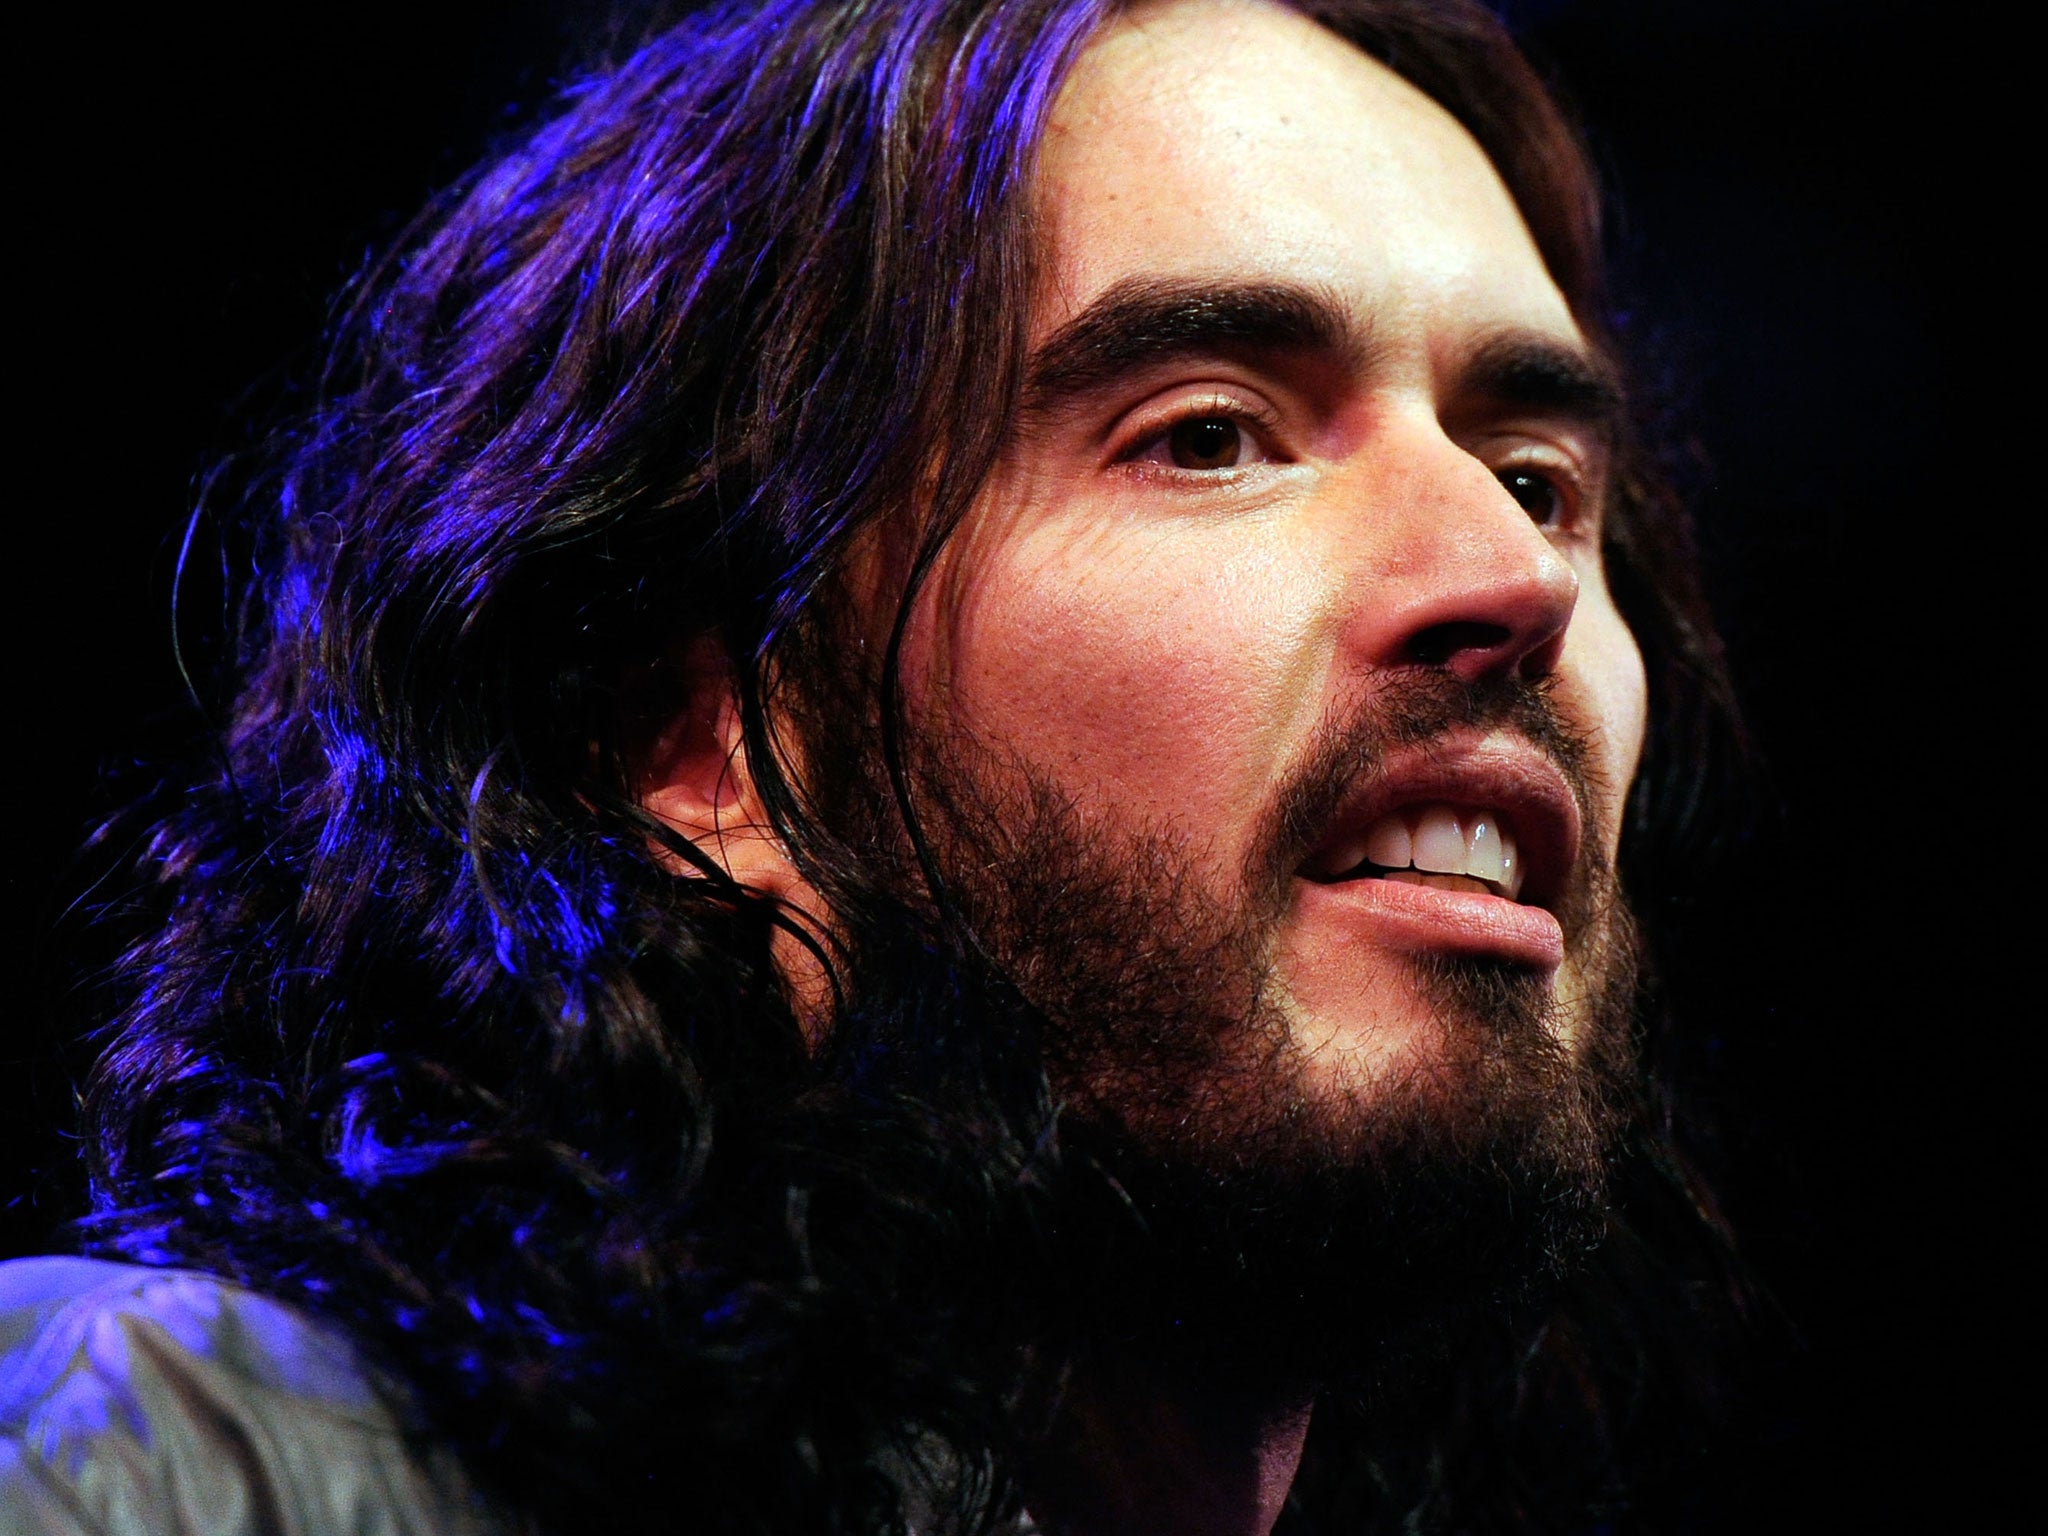 Russell Brand is being given too much air-time on the BBC, according to angry listeners